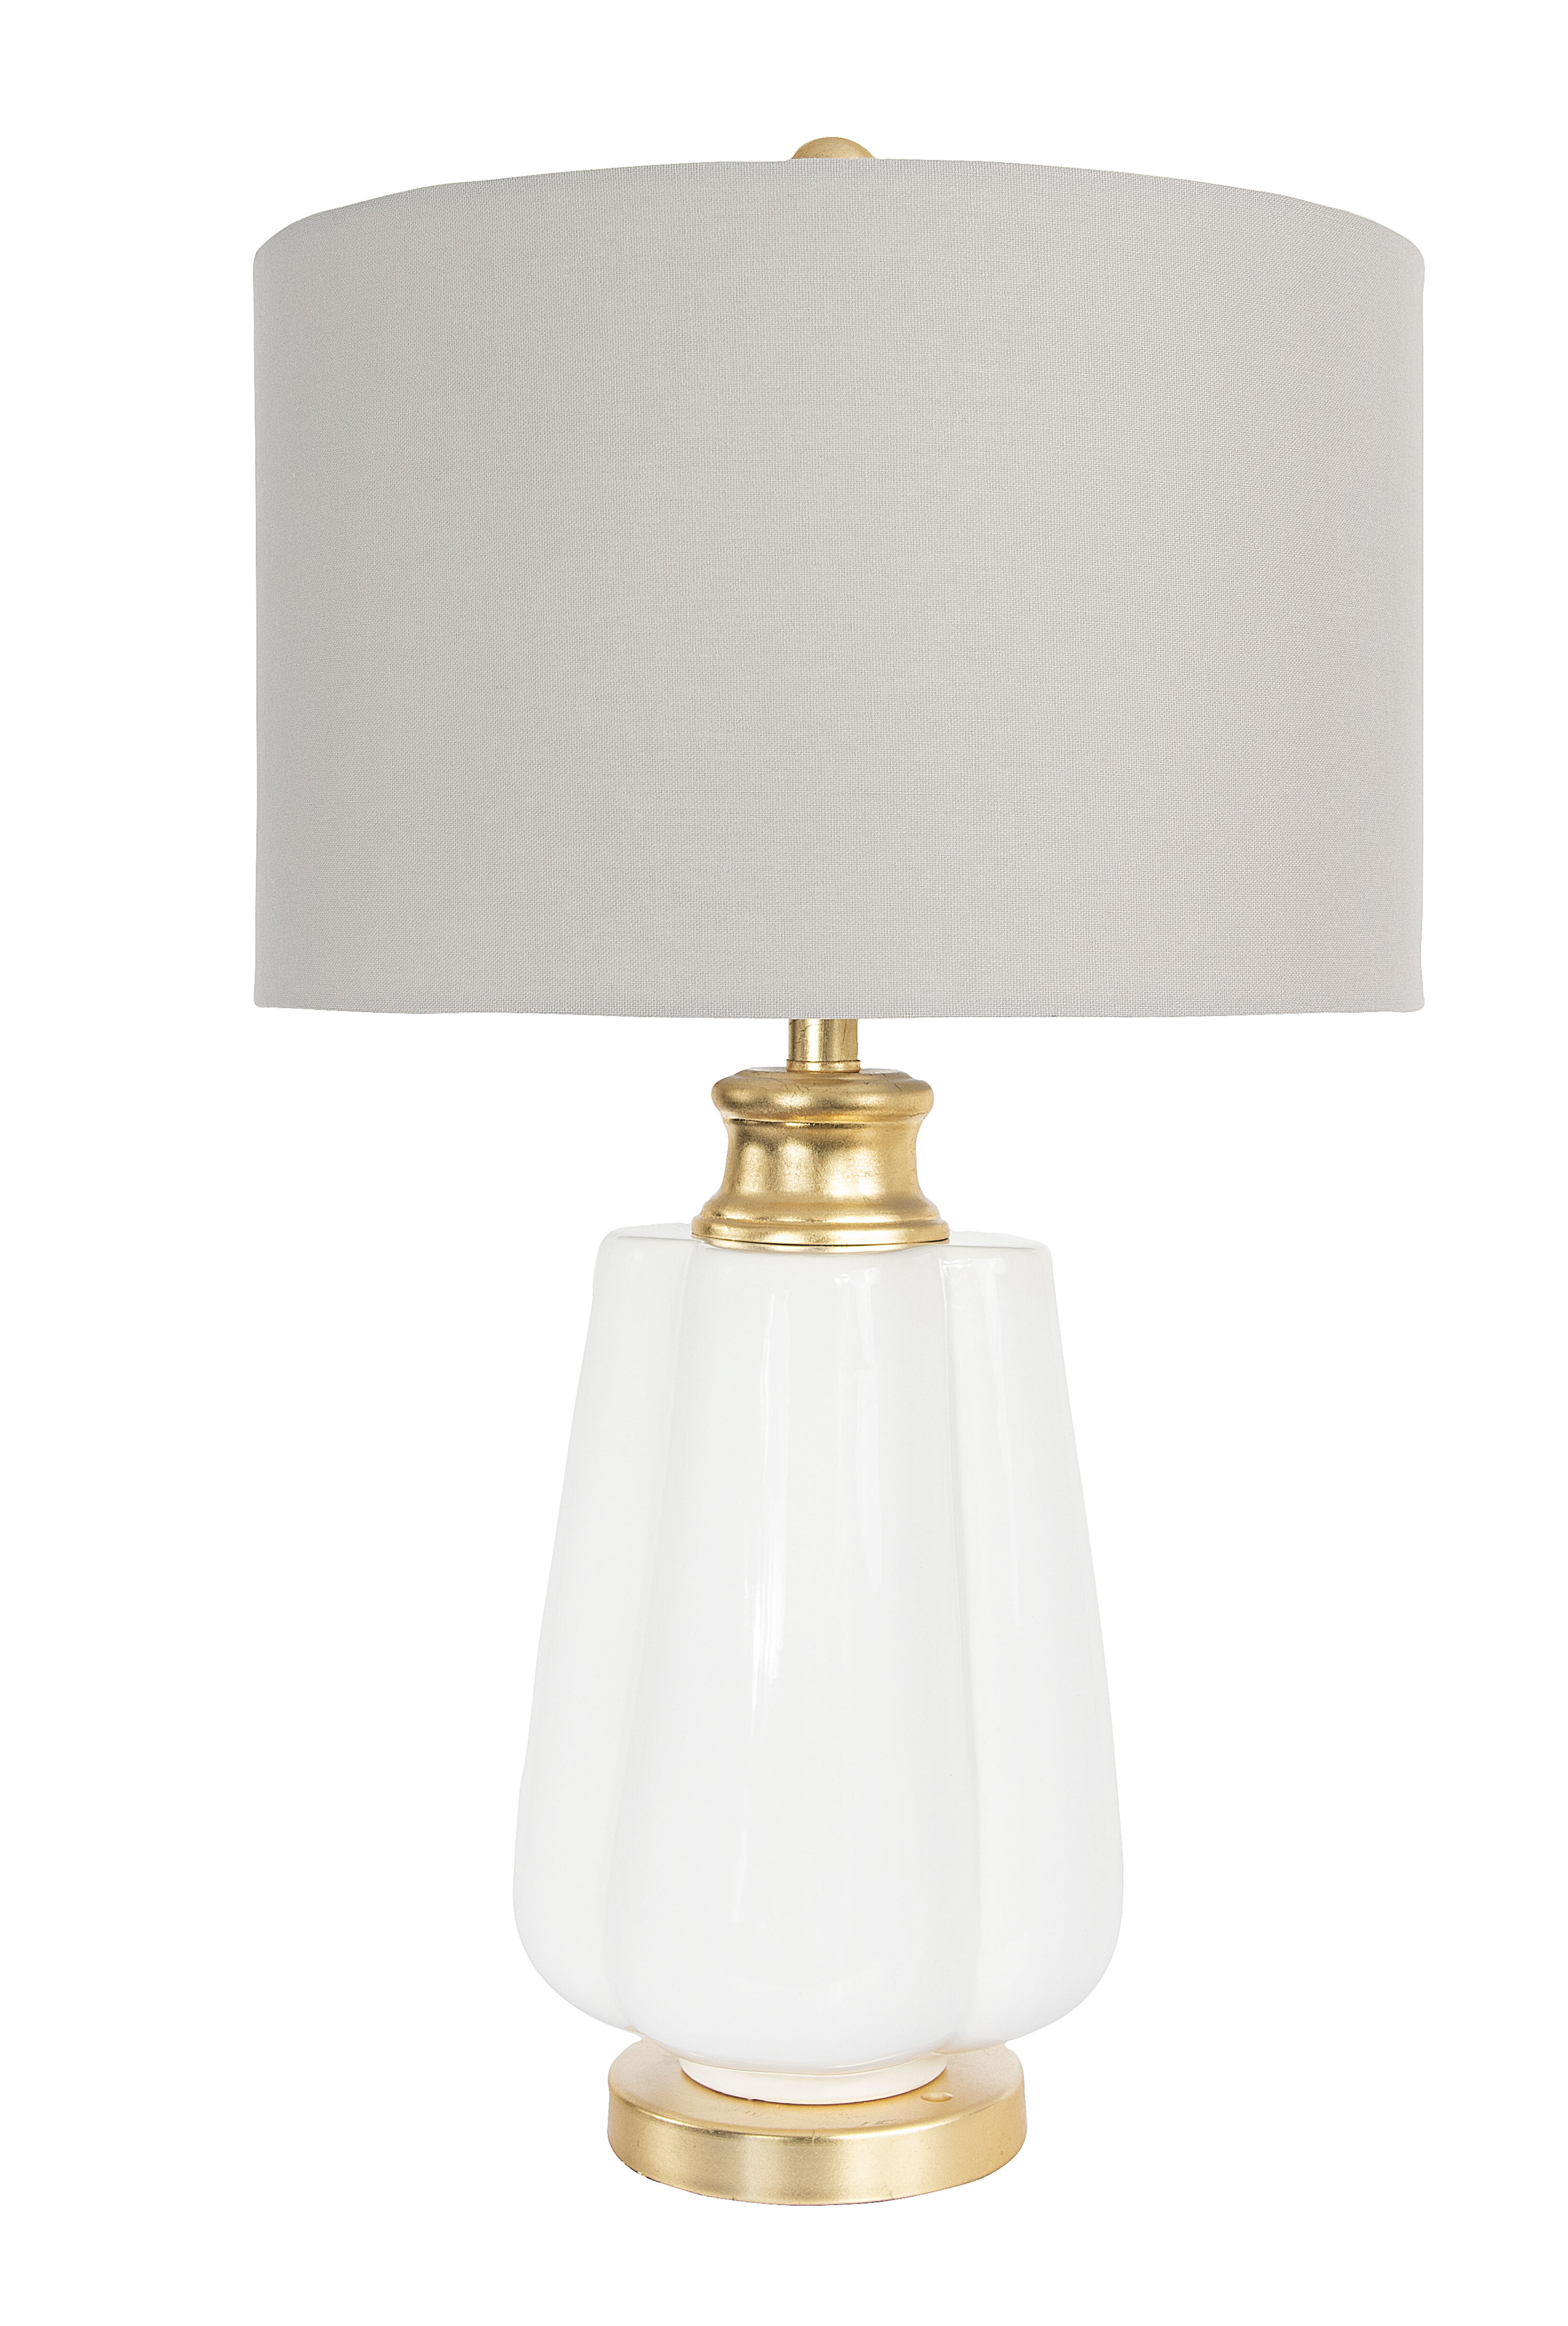 white and gold lamp shade